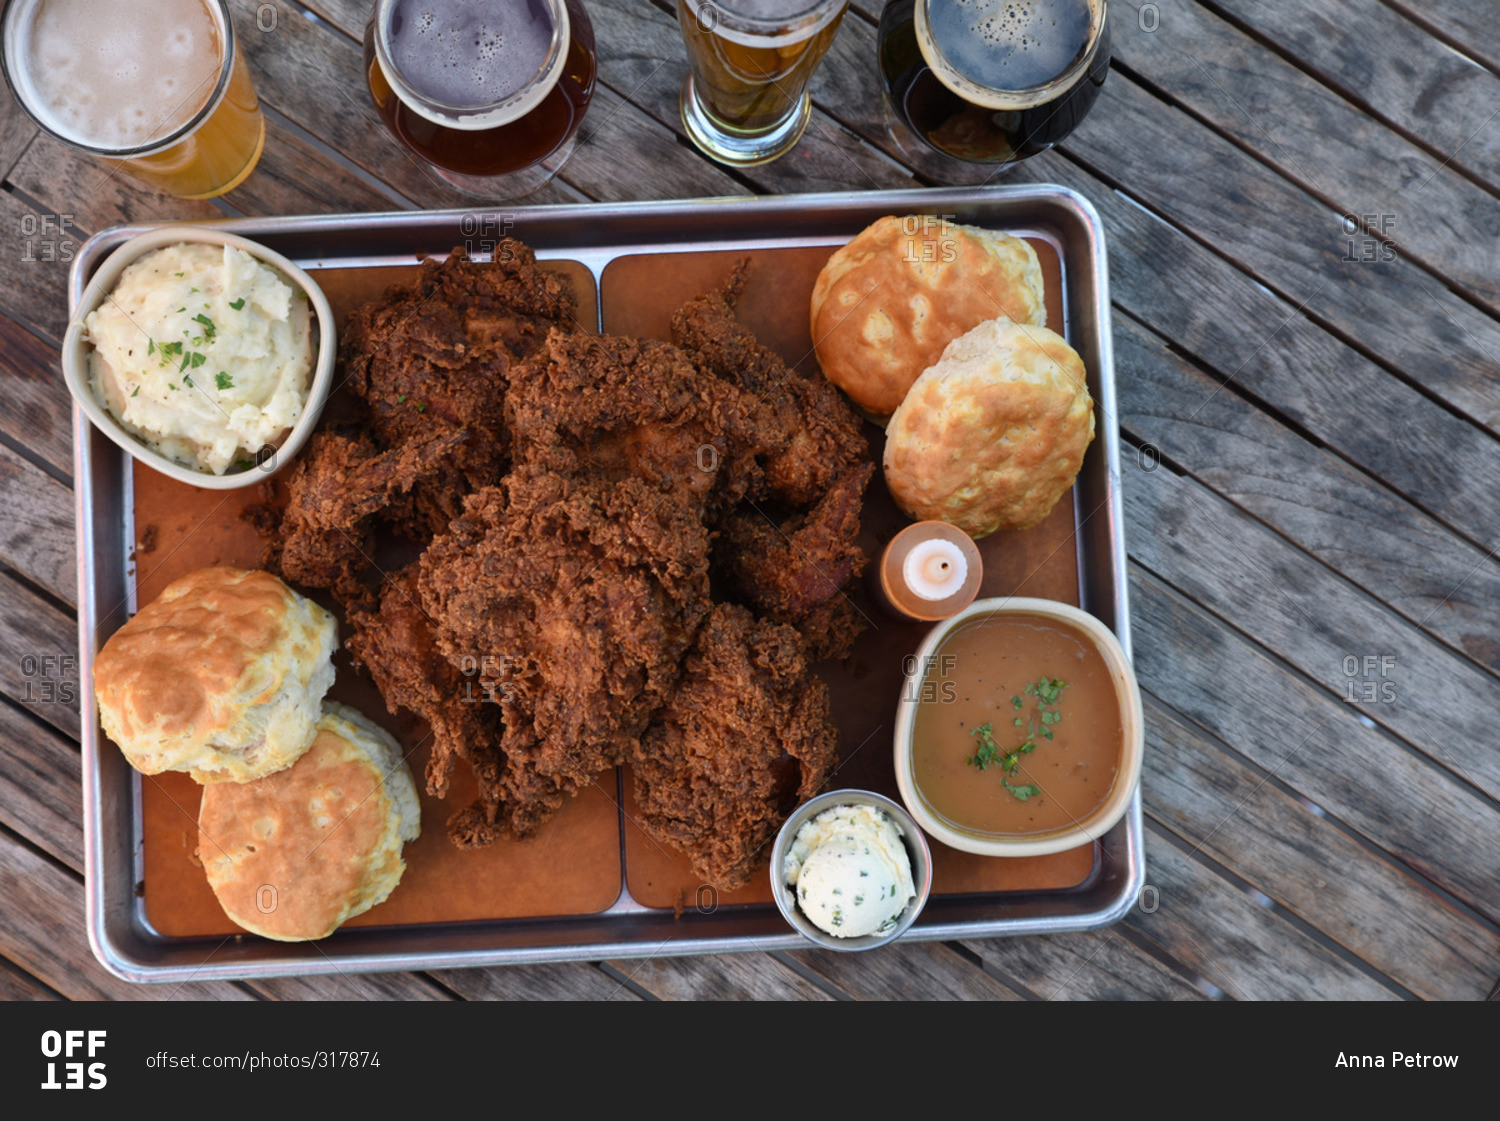 Tray of fried chicken and biscuits served with a flight of beer